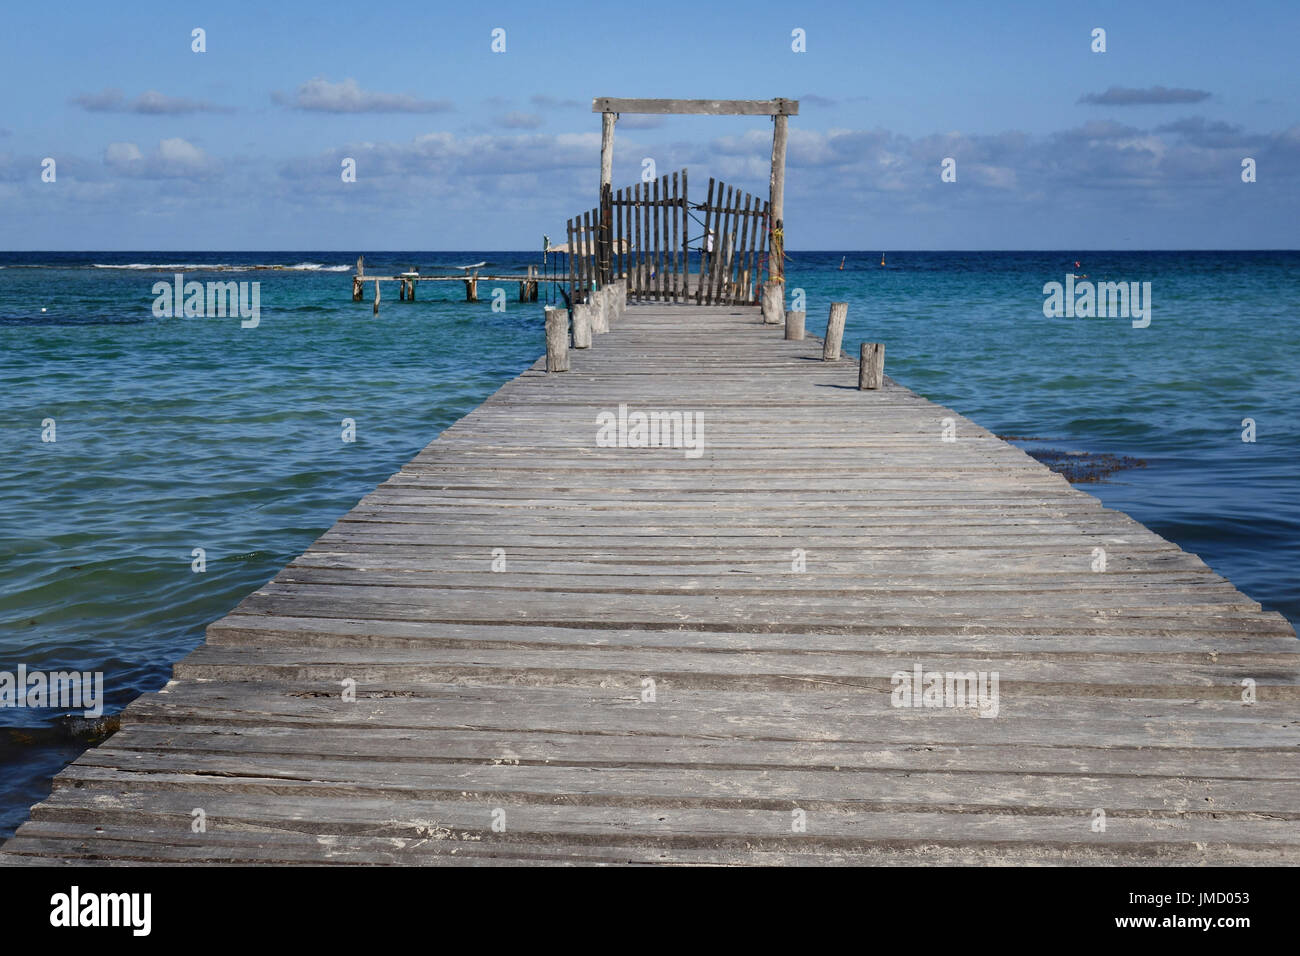 Pier with gate, Costa Maya, Mexico Stock Photo